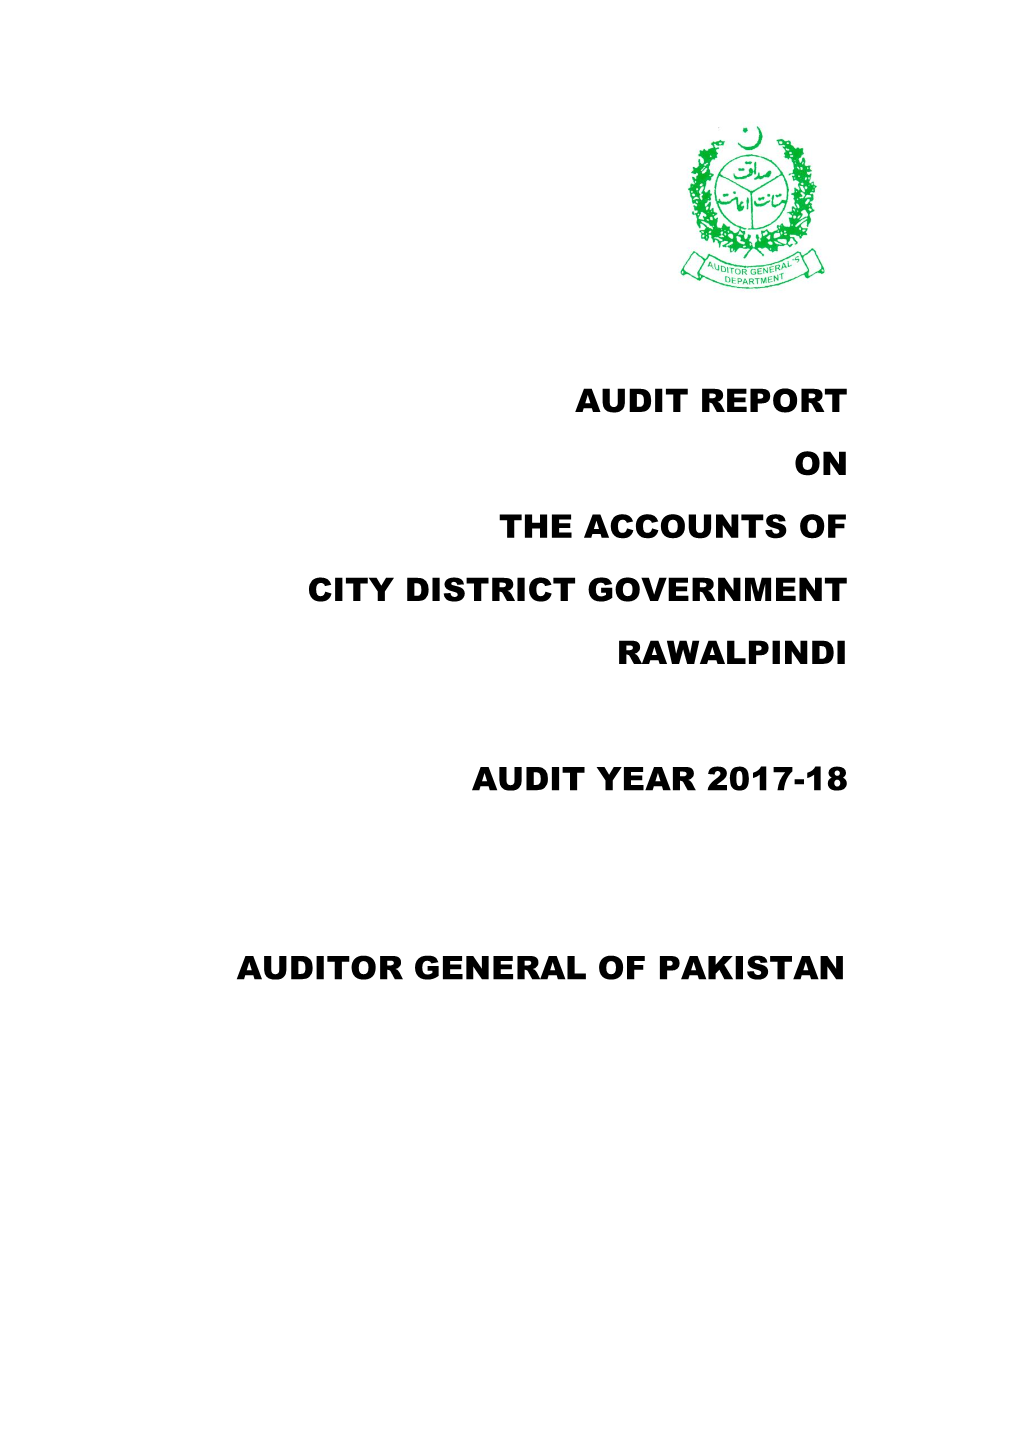 Audit Report on the Accounts of City District Government Rawalpindi